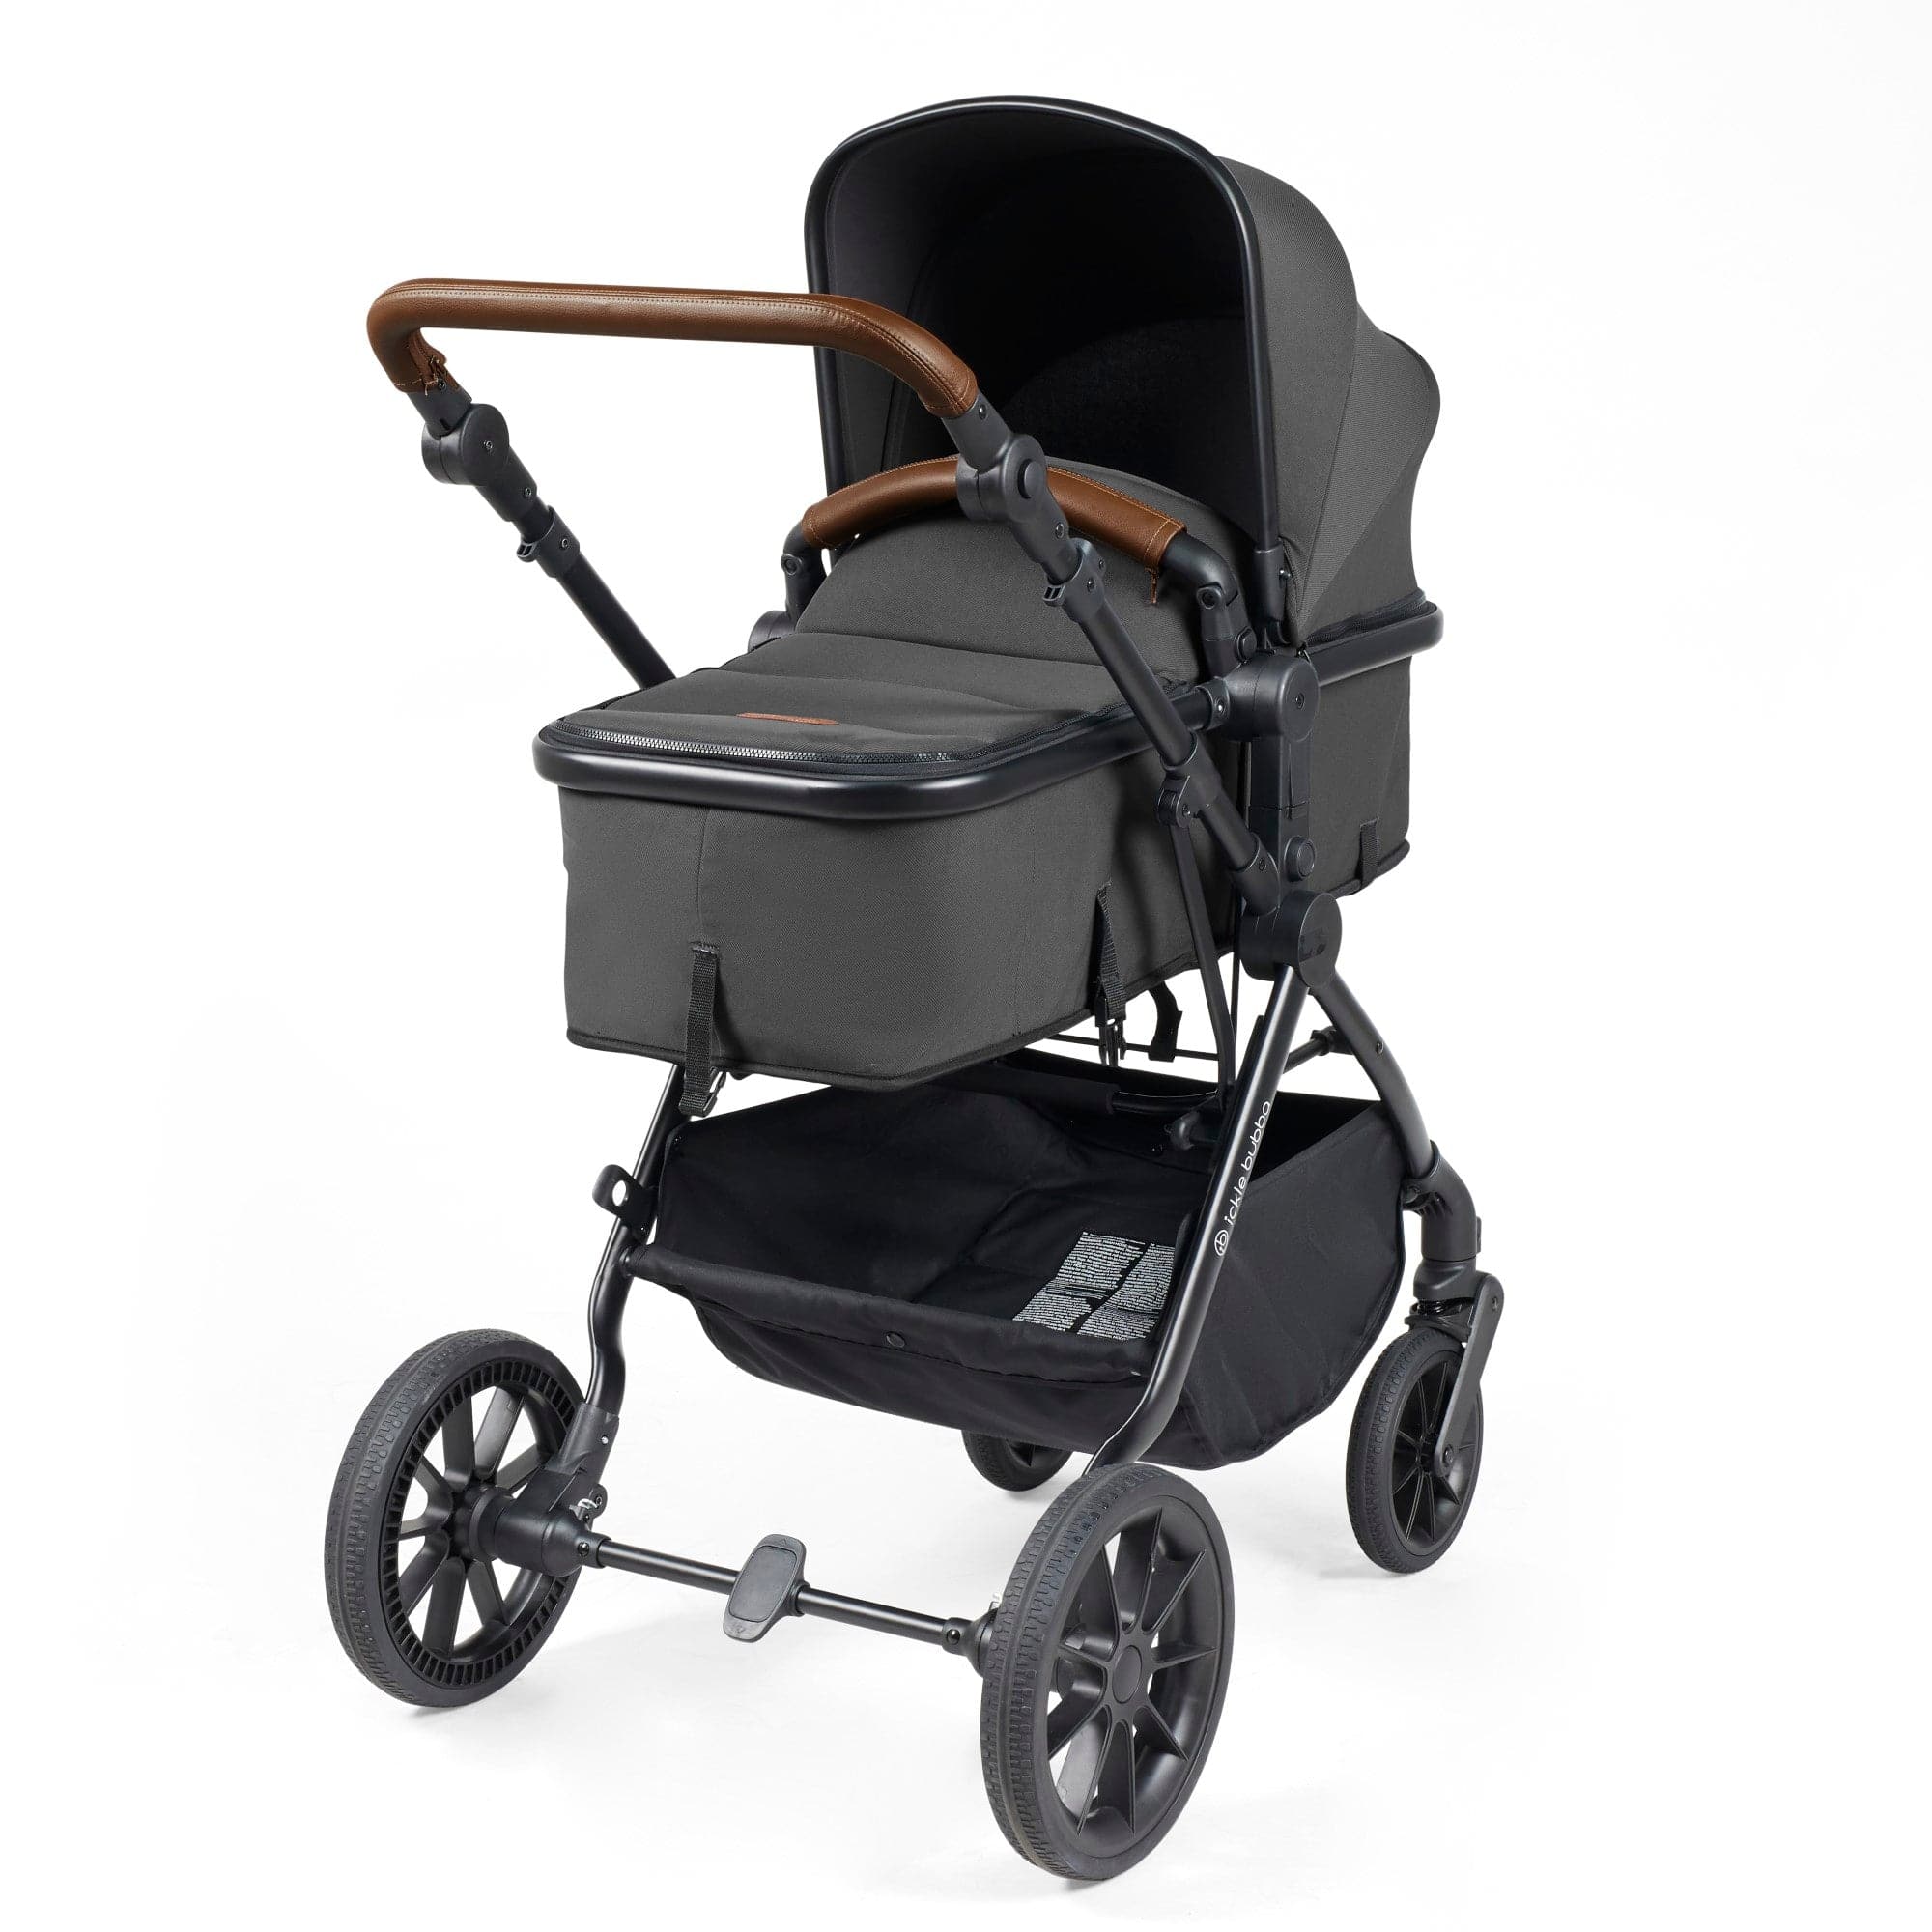 Ickle Bubba Cosmo I-Size Travel System & Isofix Base - Graphite Grey   